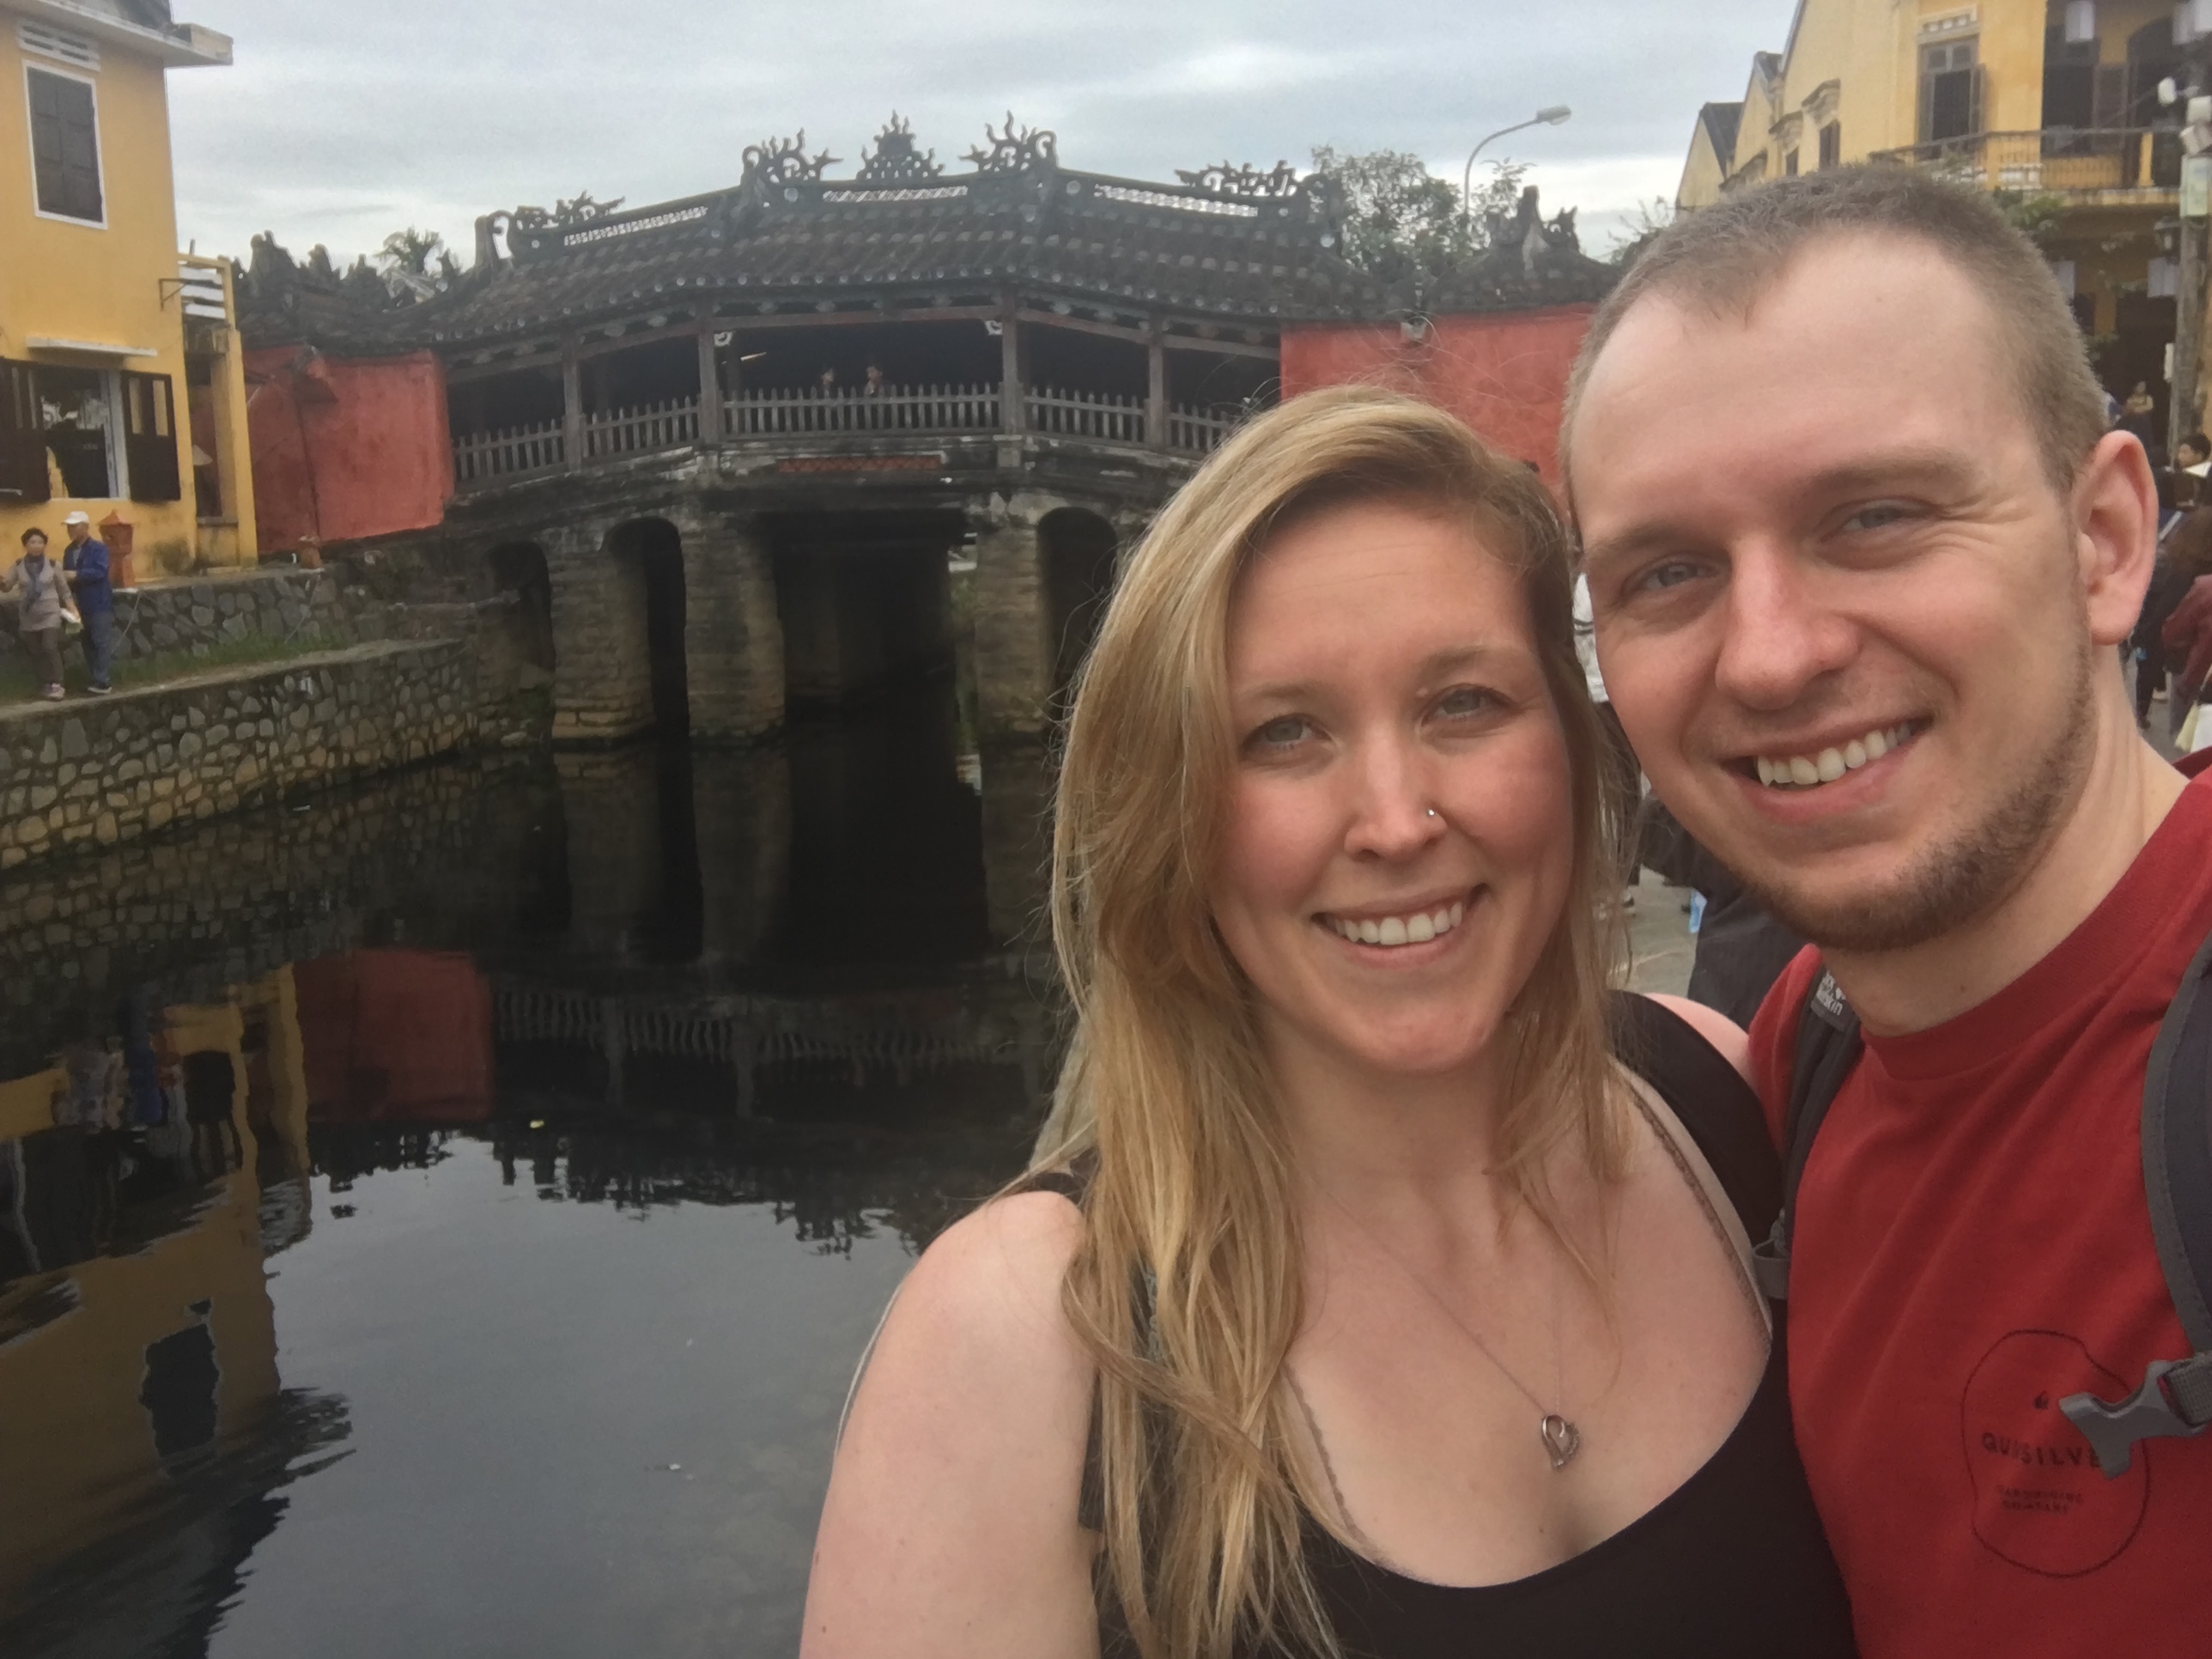 Erinn and Ben in front of the old Japanese Bridge in Hoi An Ancient Town, Vietnam.